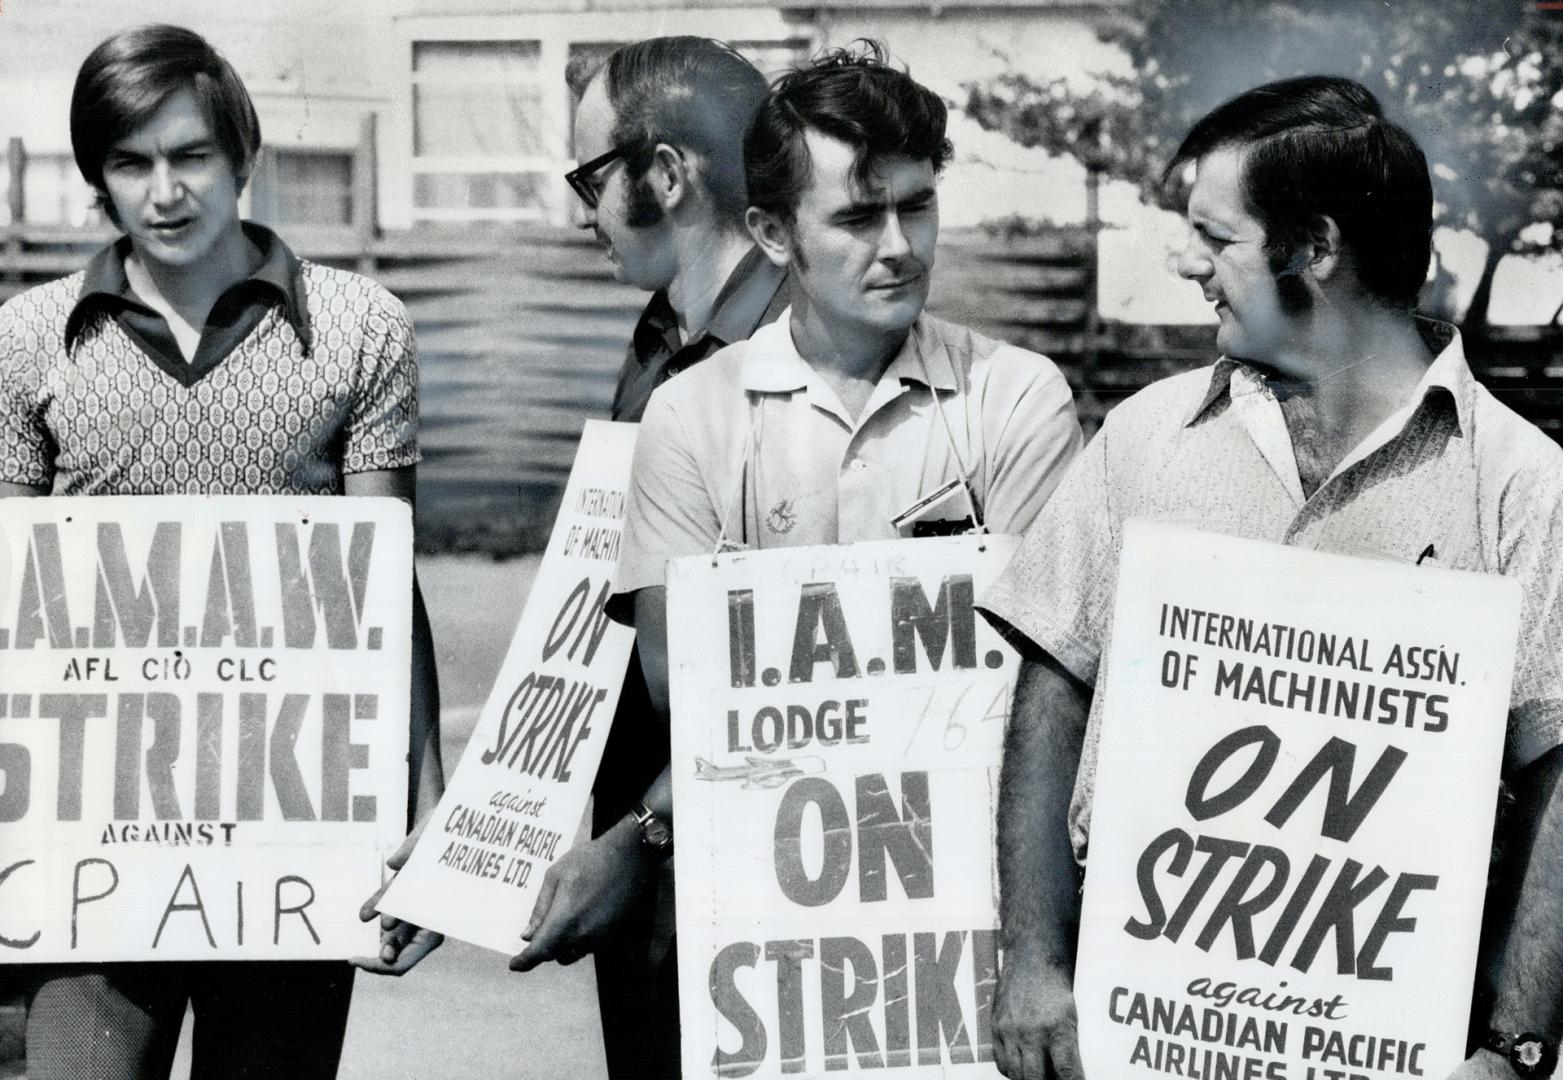 Only Evidence of the strike against CP Air, by nearly 100 Toronto members of International Association of Machinists, as it entered its fourth week, w(...)